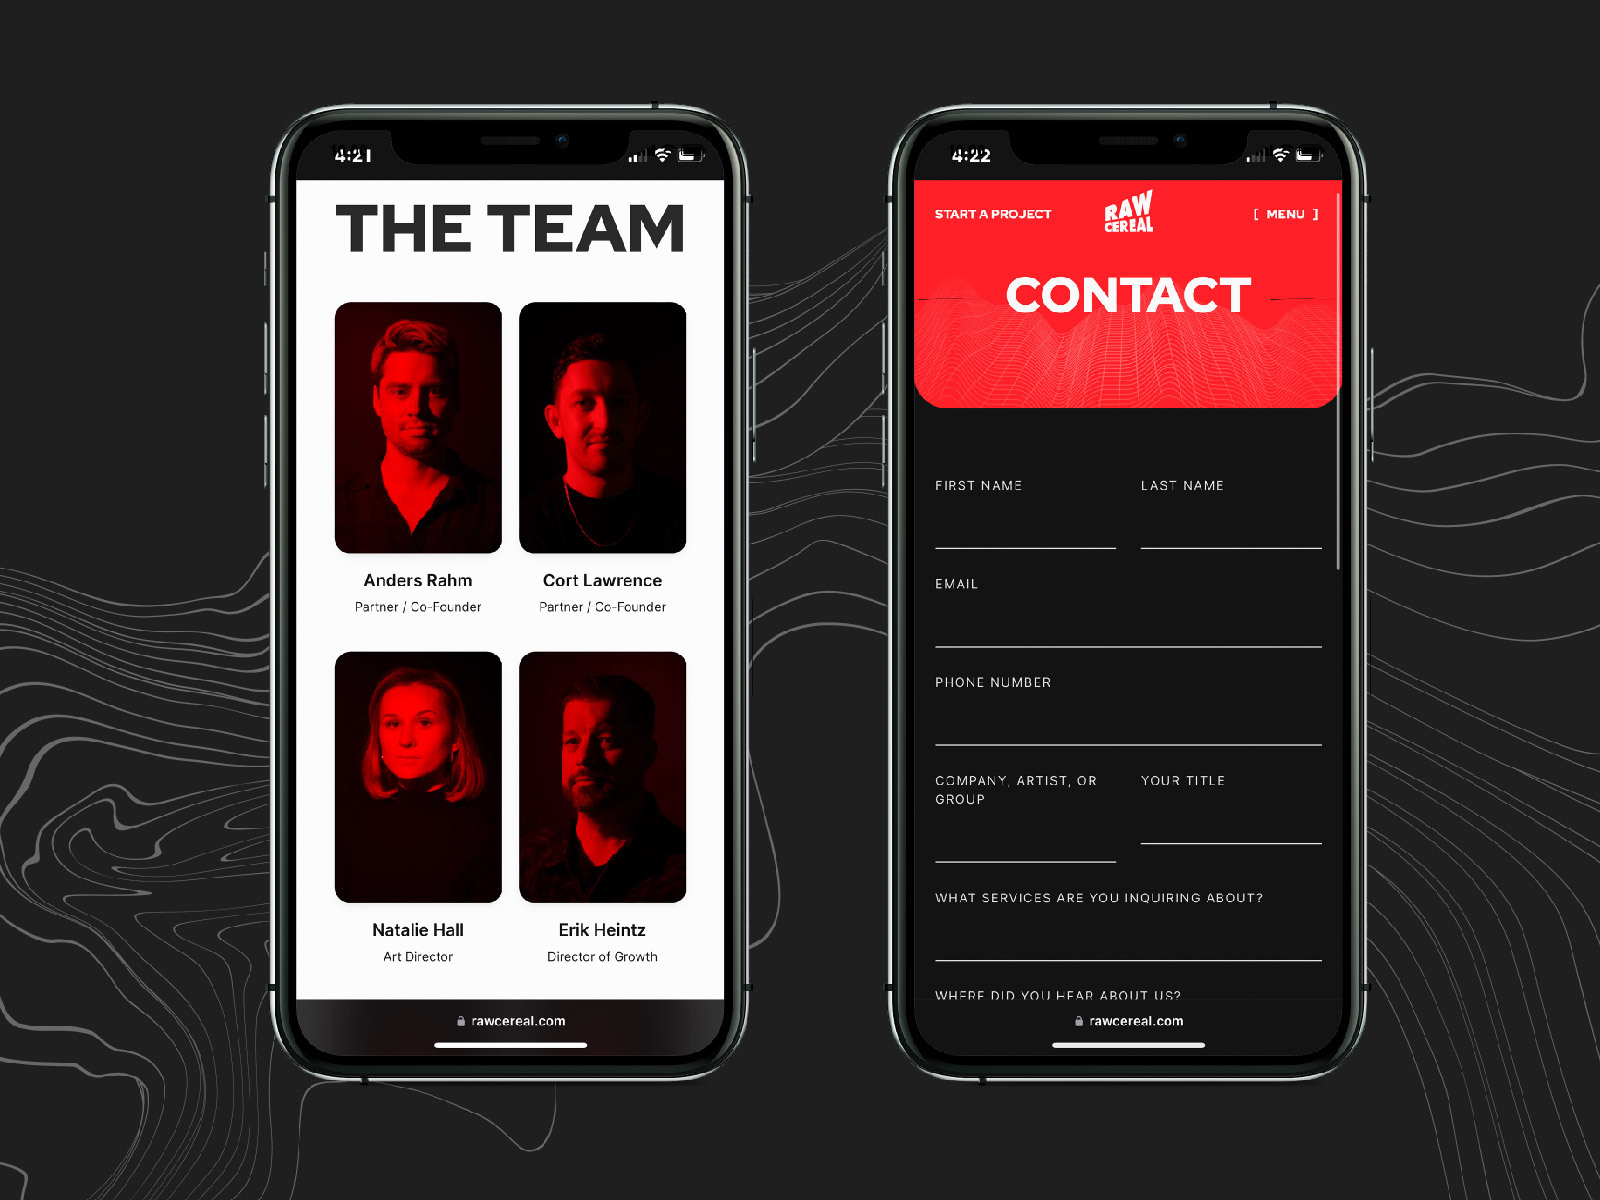 About Us + Contact